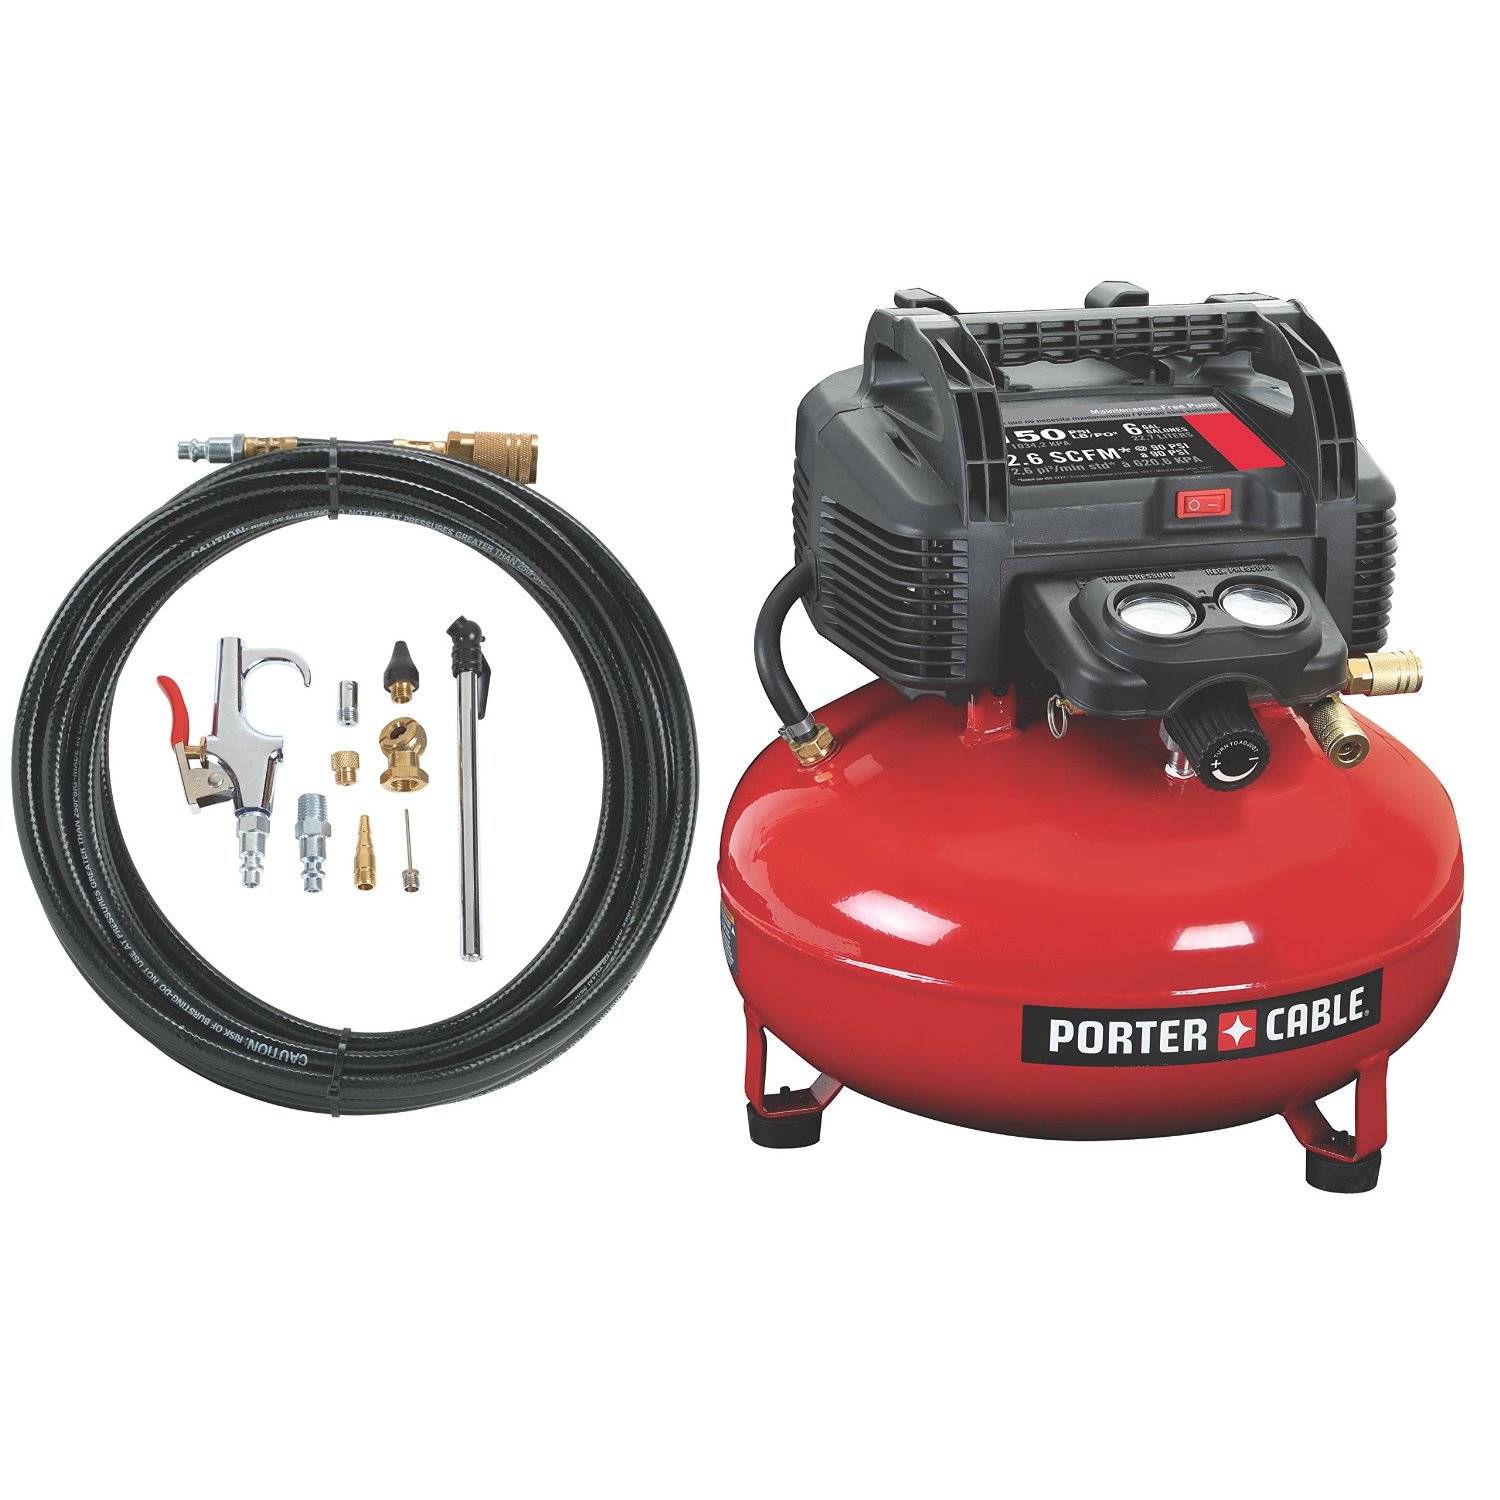 36% off on a PORTER-CABLE compressor kit!